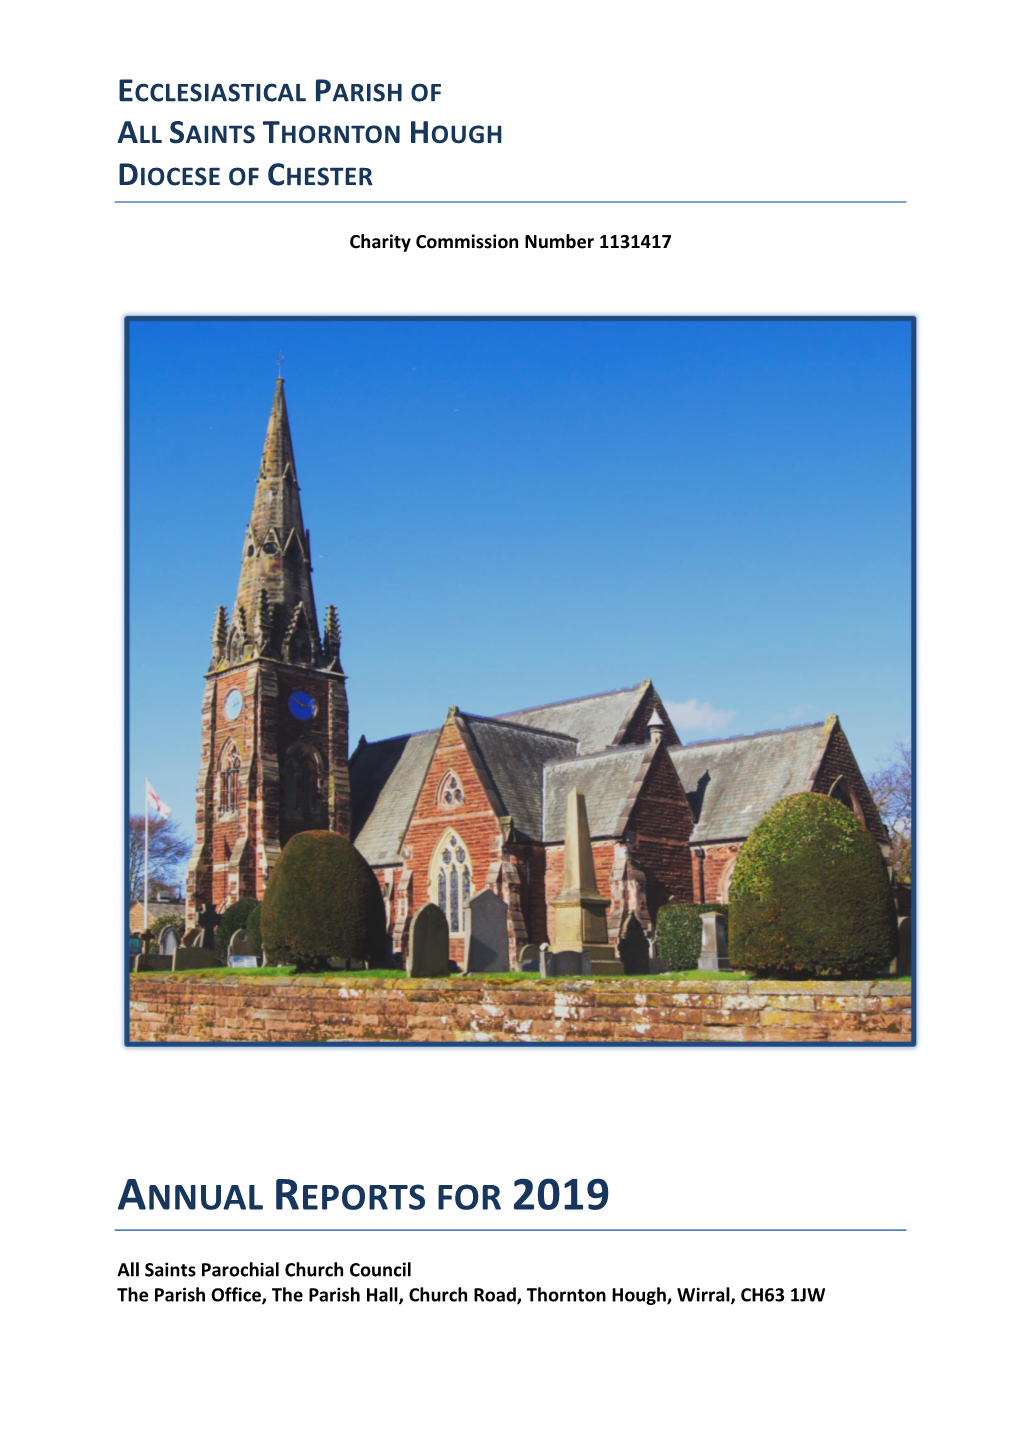 Annual Reports for 2019